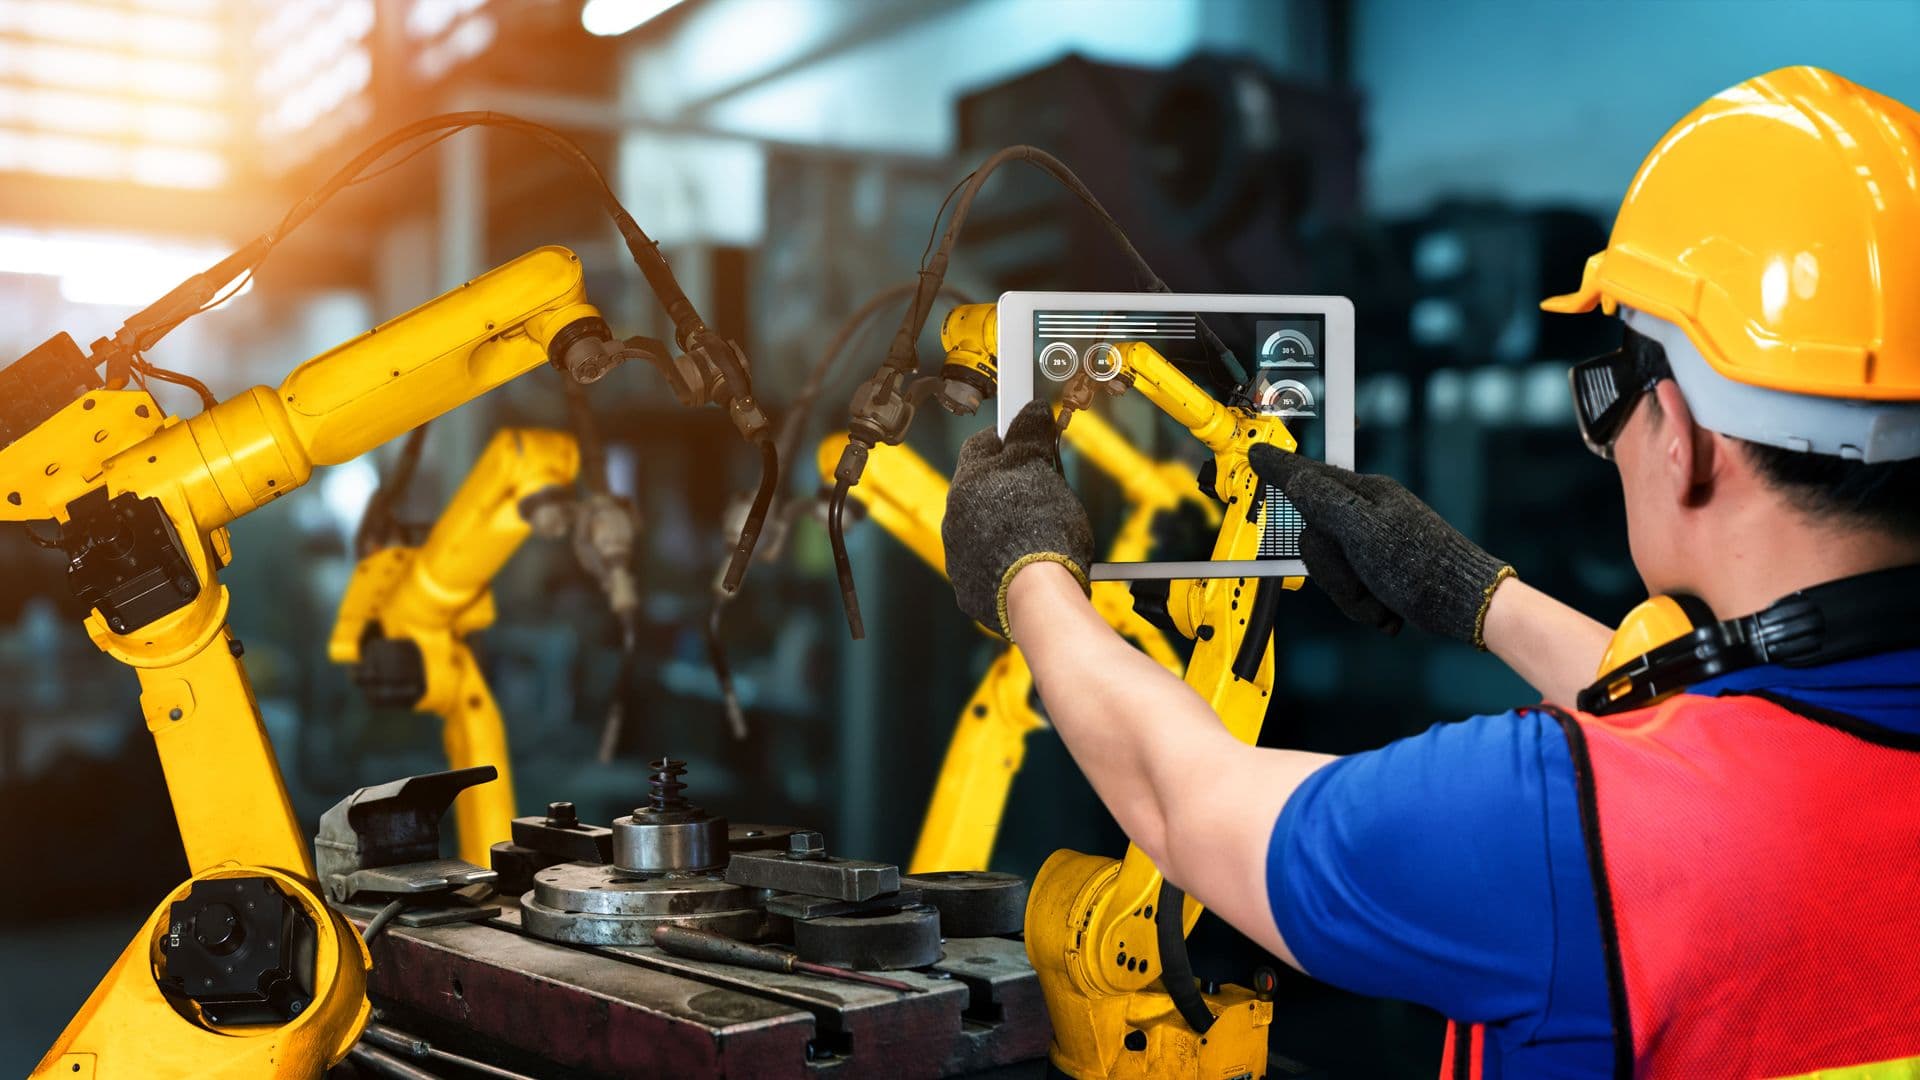 7 Steps to Becoming a “Smarter Manufacturer”